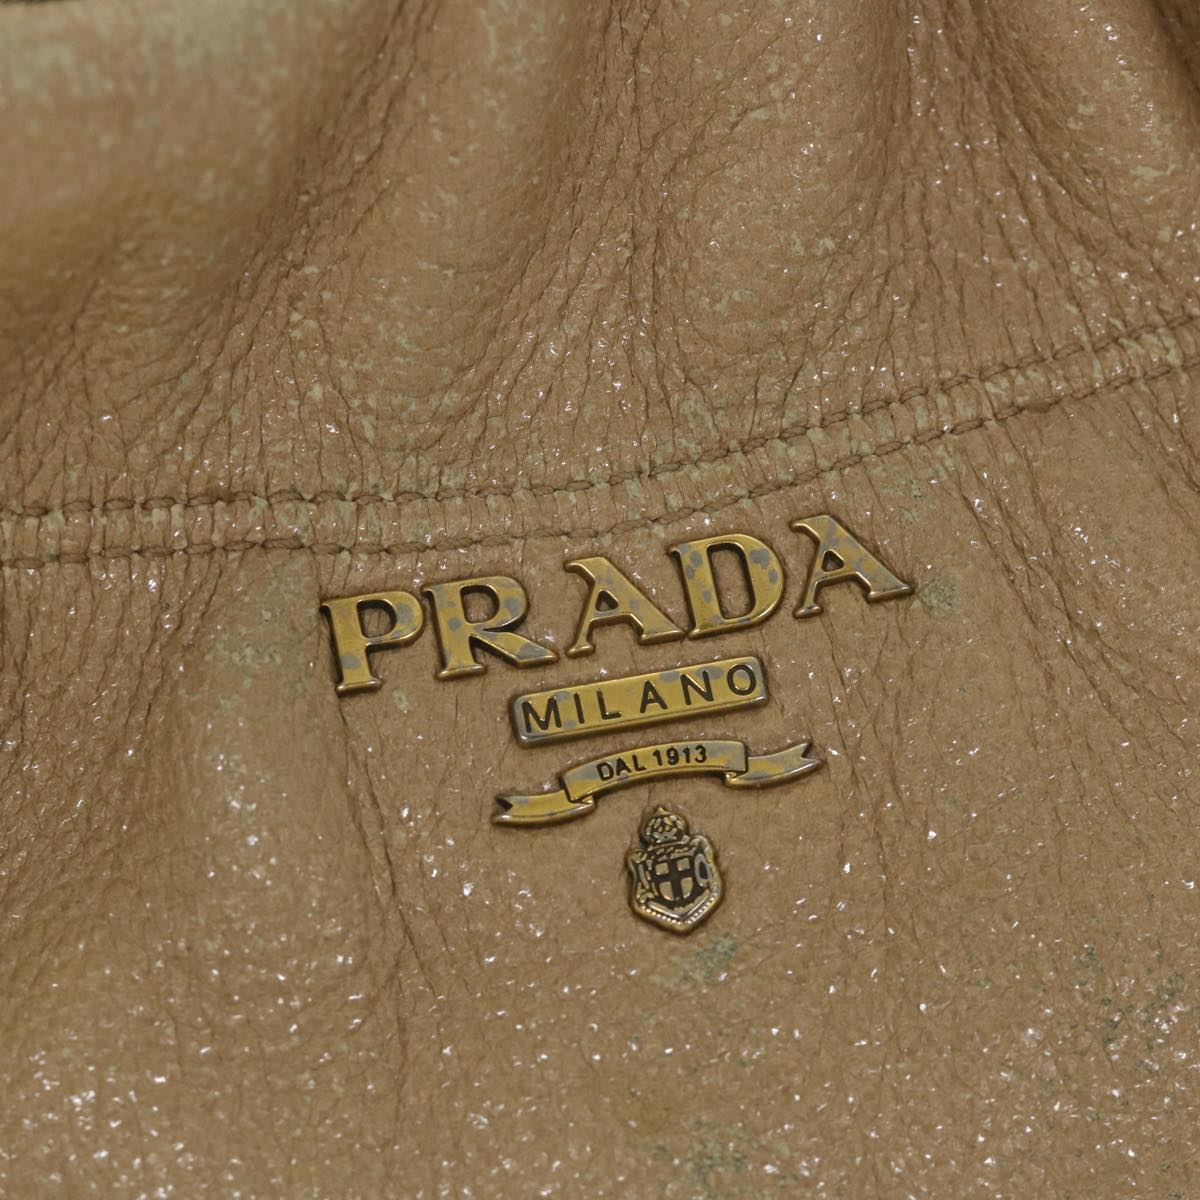 PRADA Chain Shoulder Bag Leather Brown Auth bs10196